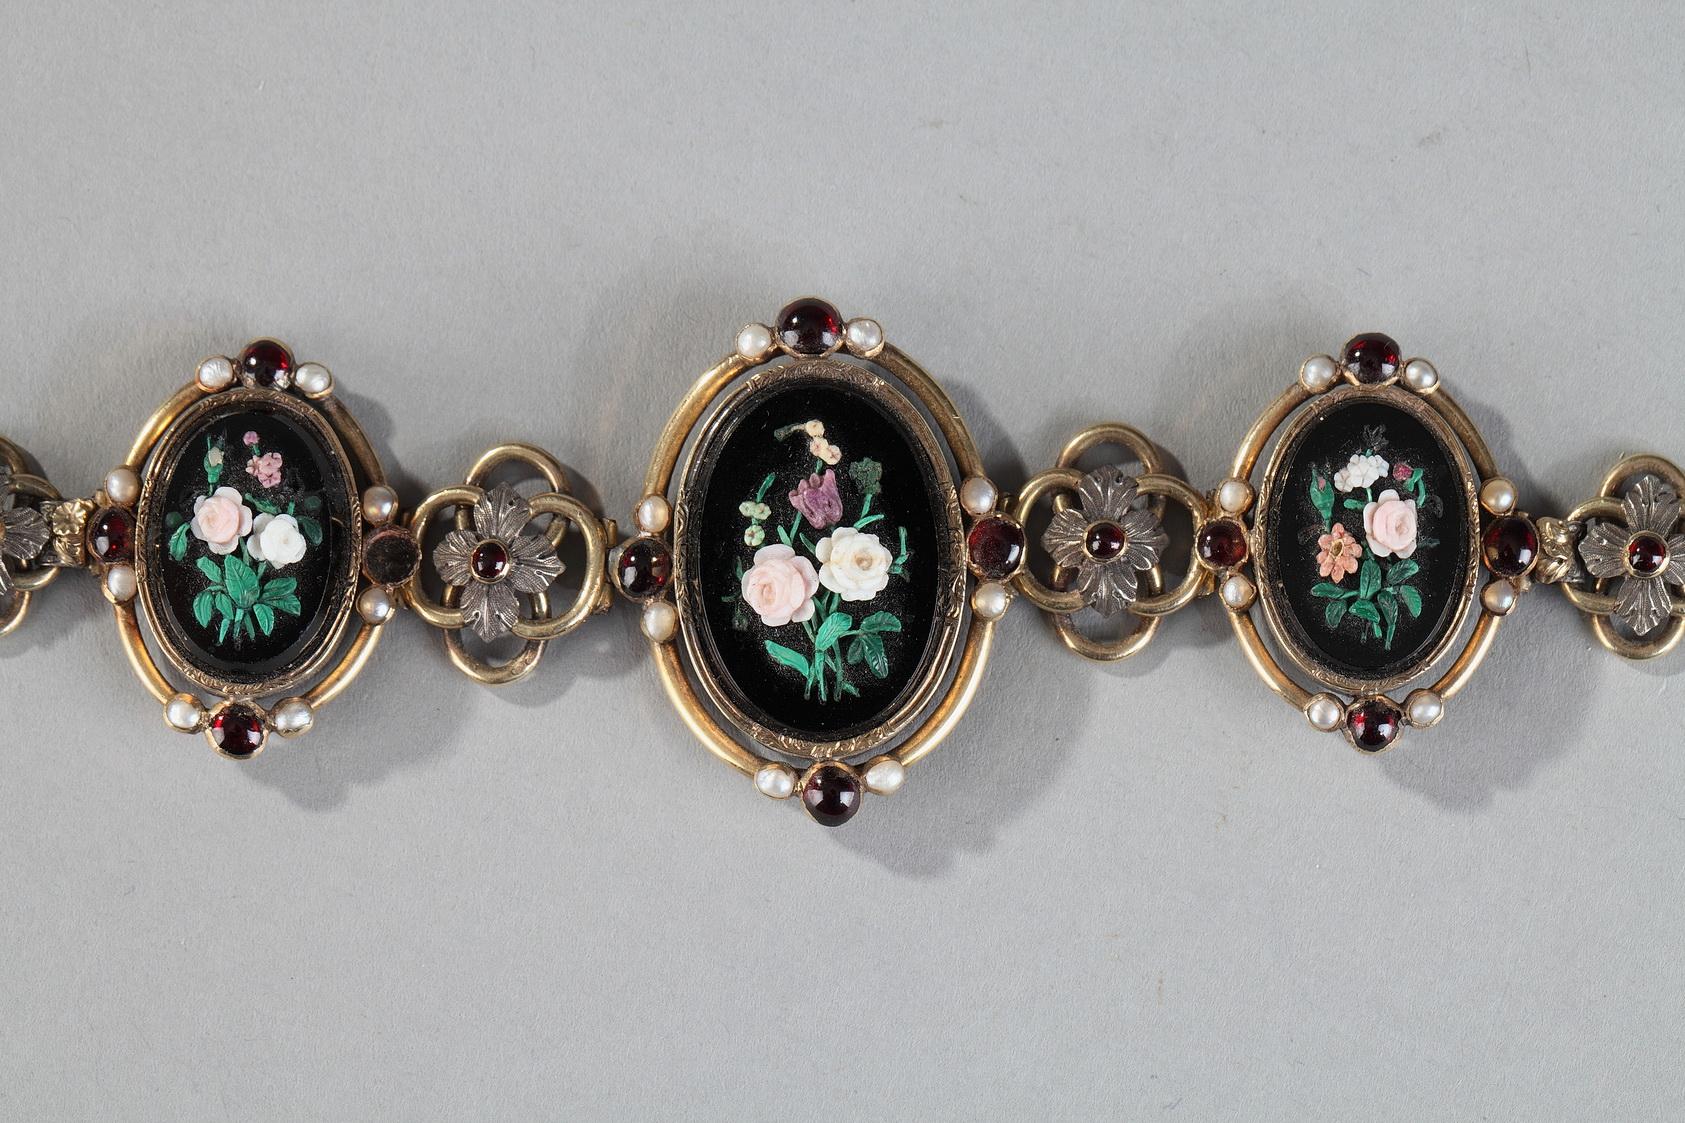 19th Century Silver-Gilt Bracelet with Micromosaic Medallions In Good Condition For Sale In Paris, FR